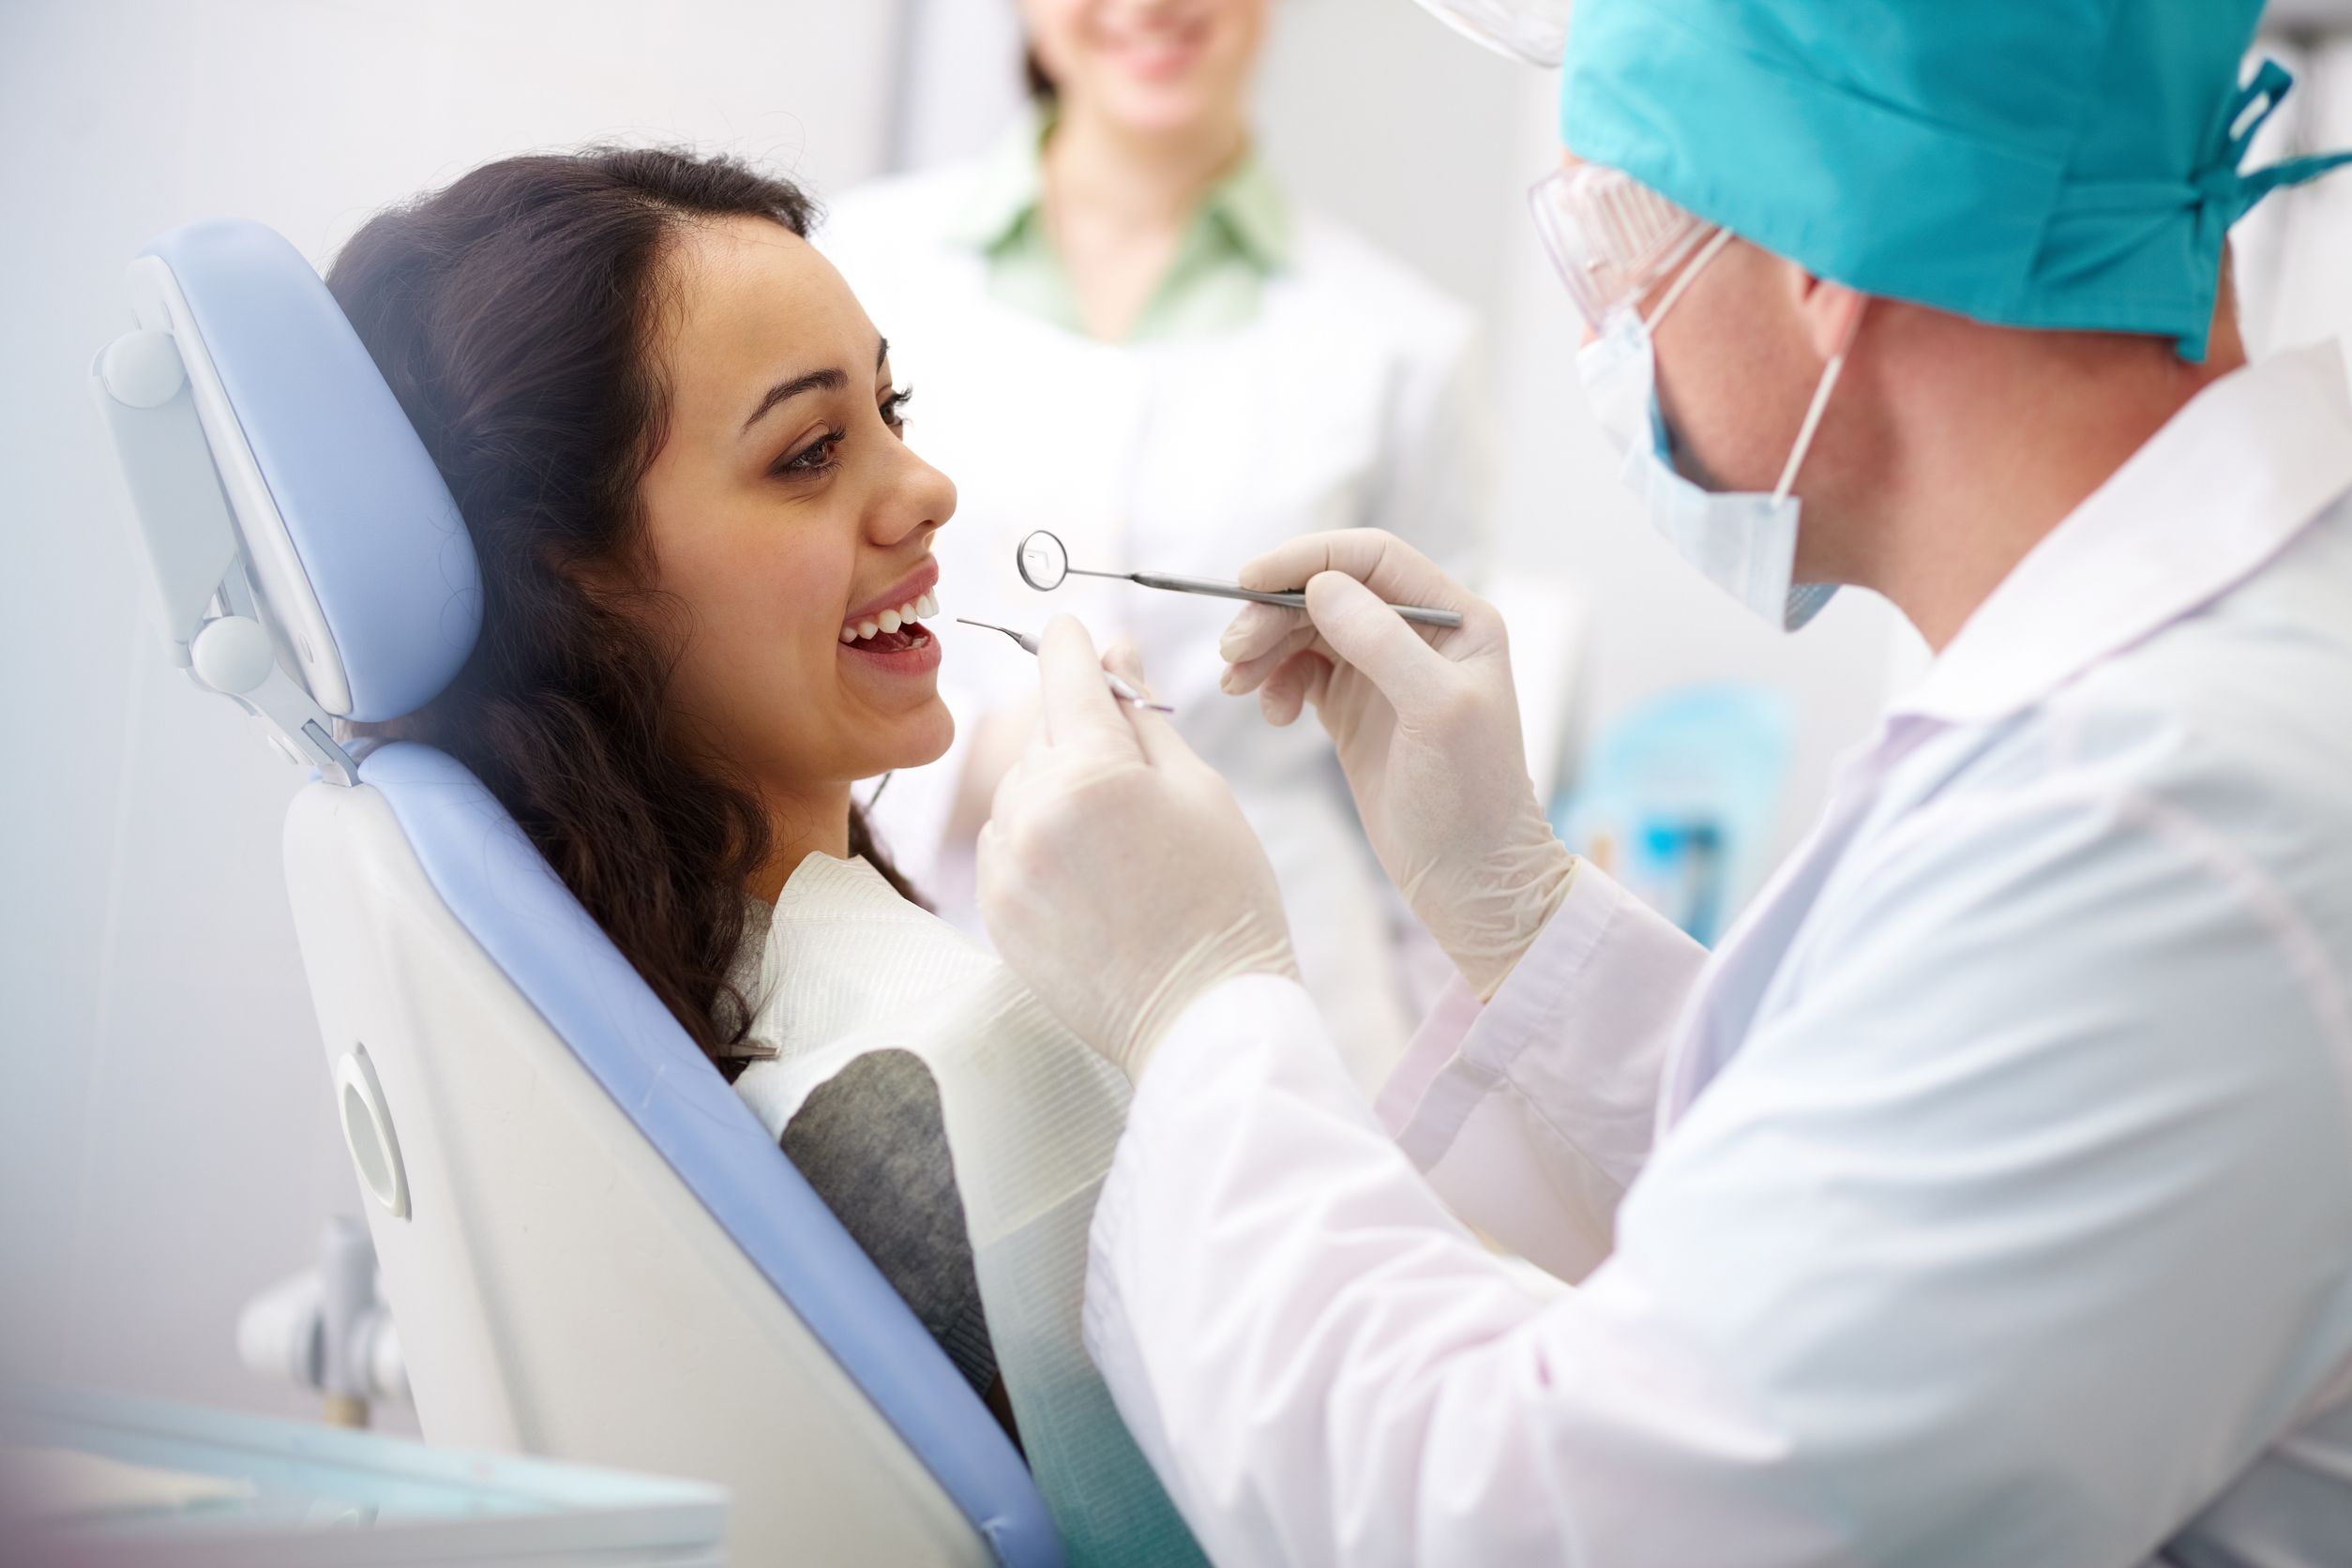 Transform Your Smile with a Cosmetic Dentist in Chaska, MN